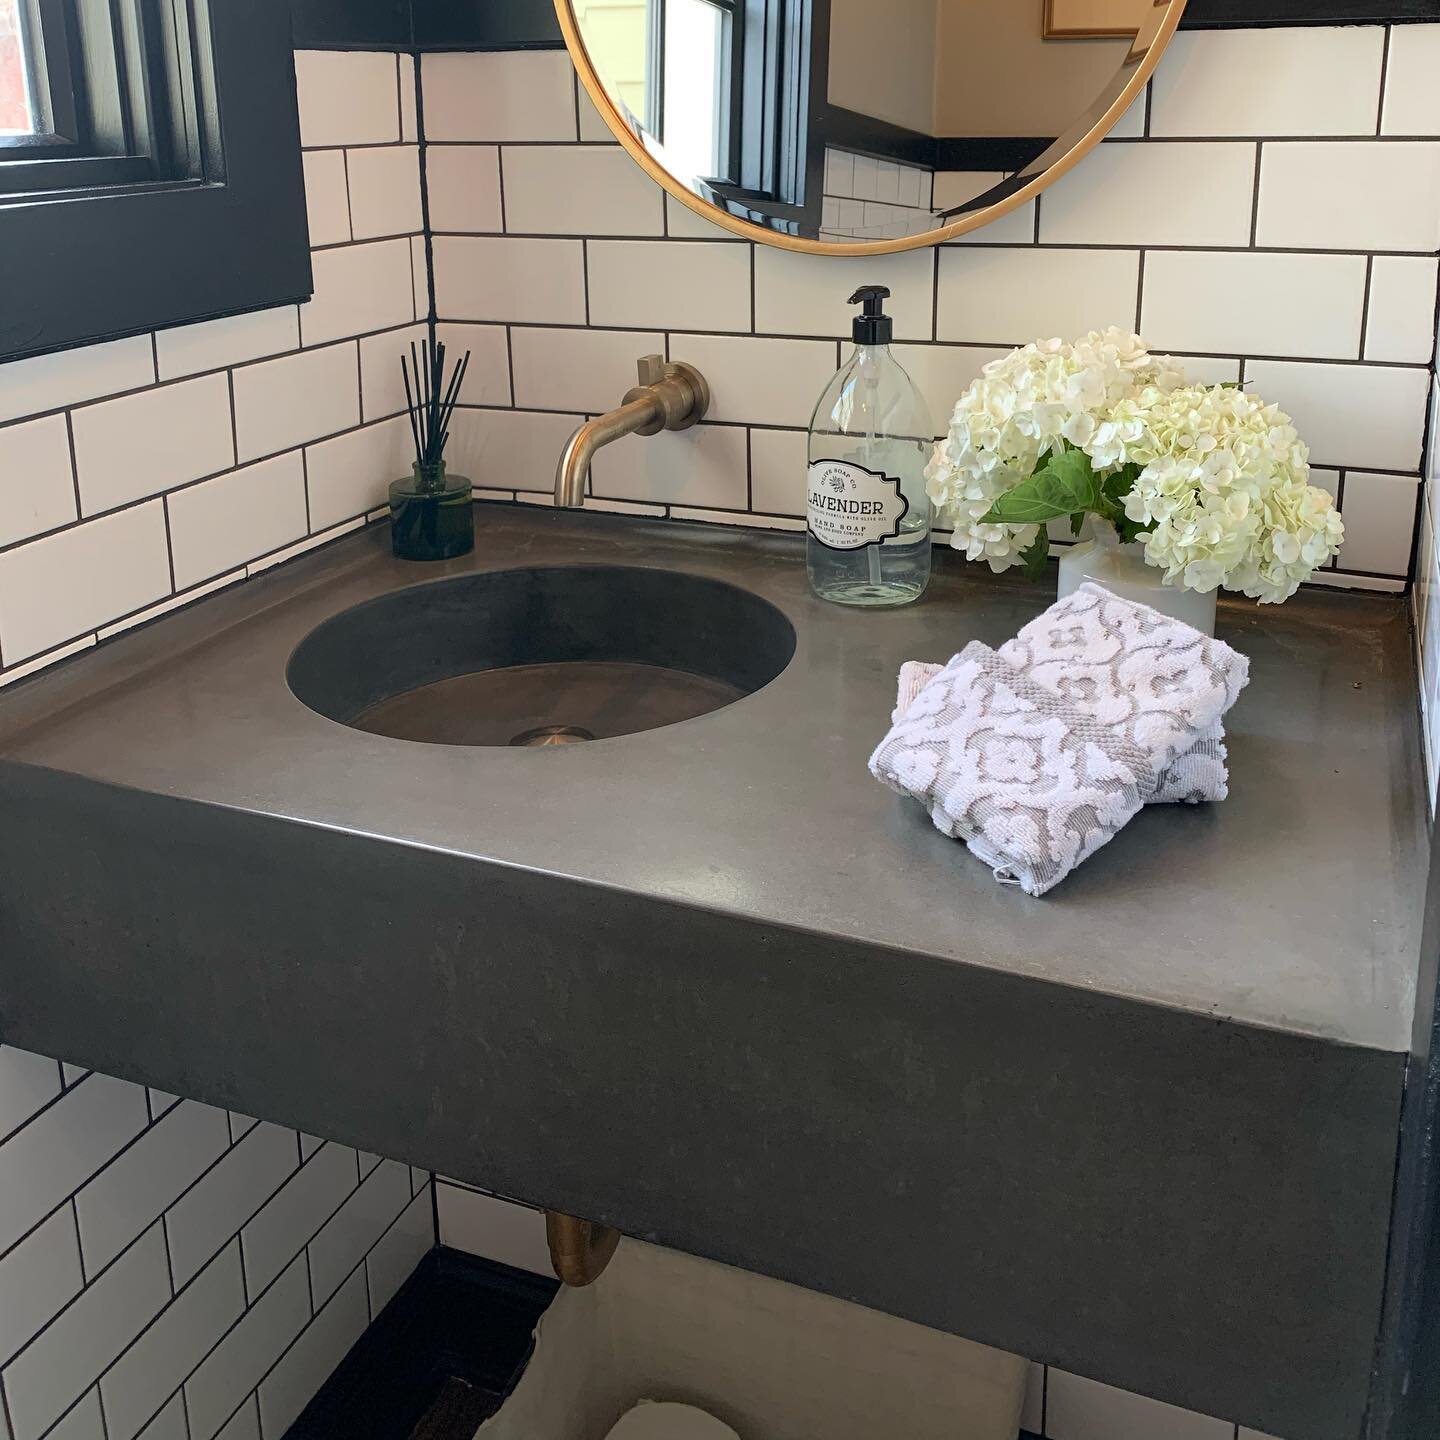 Love seeing it all come together #concretesink #concretevanity #customconcrete #charcoalconcrete #concretebathroom #bathroomdesign #concretedesign #stogsconcretedesign